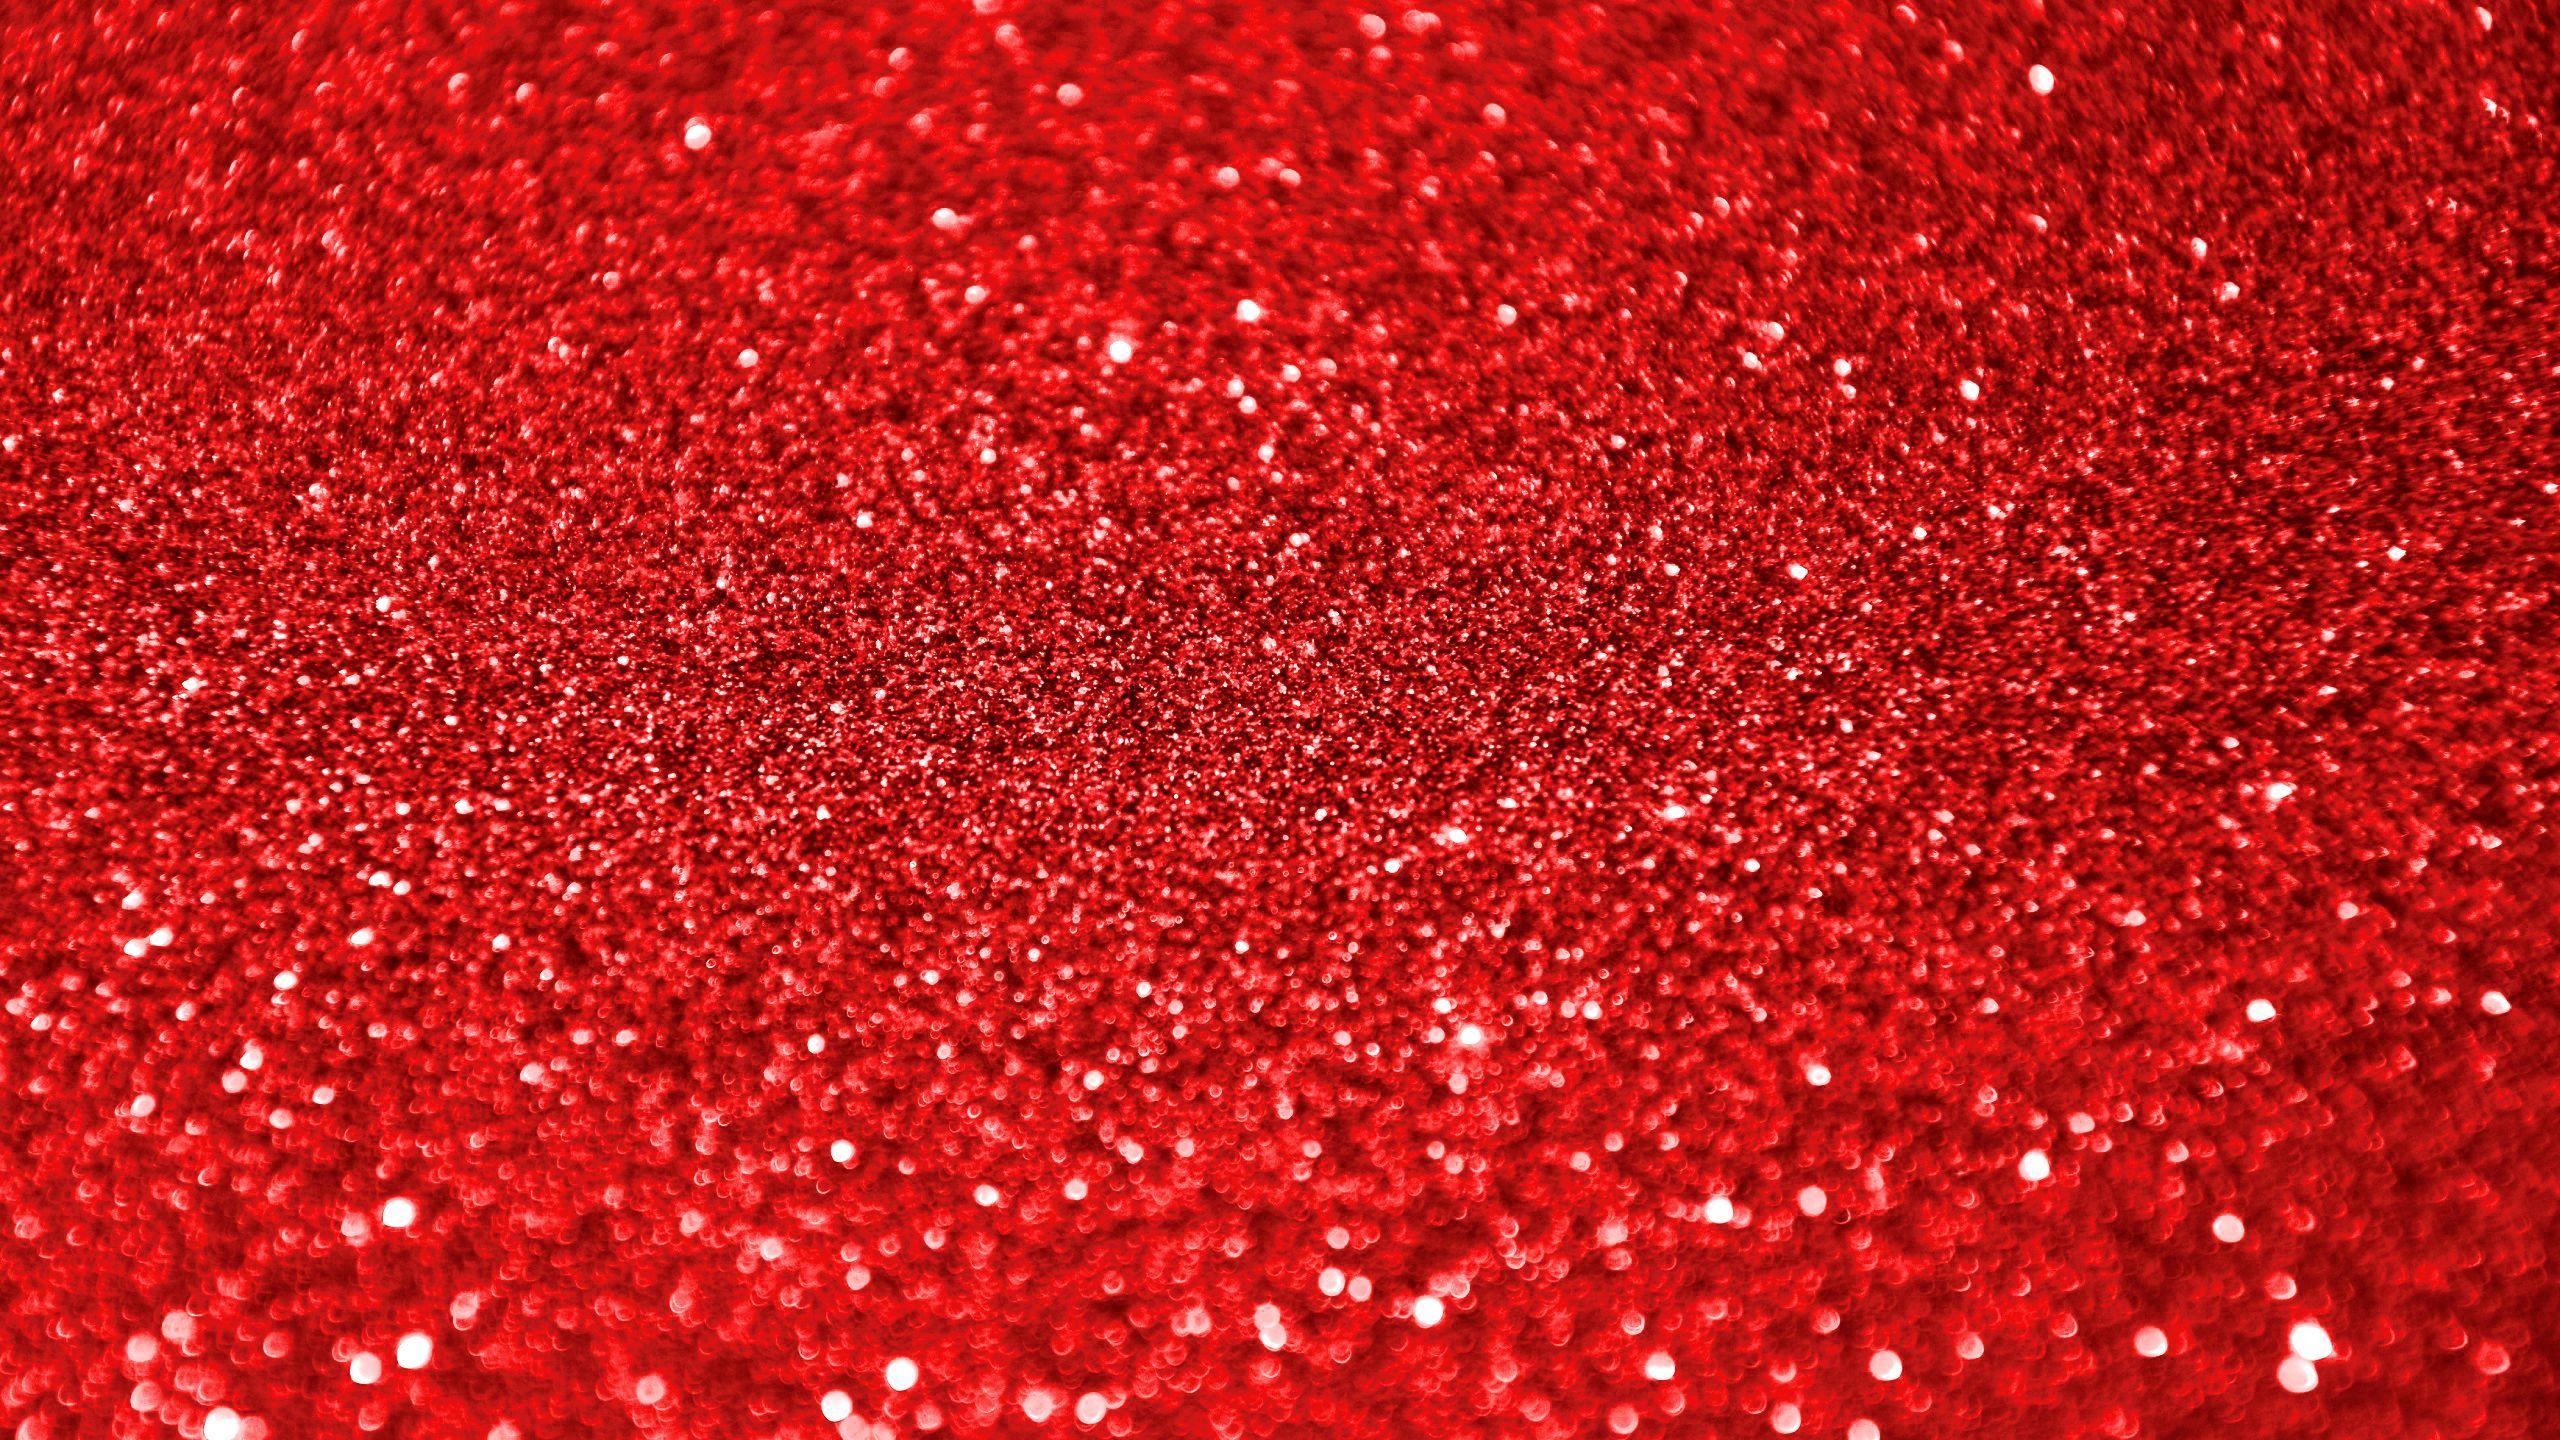 6. Glitter or sparkly shades - wide 8